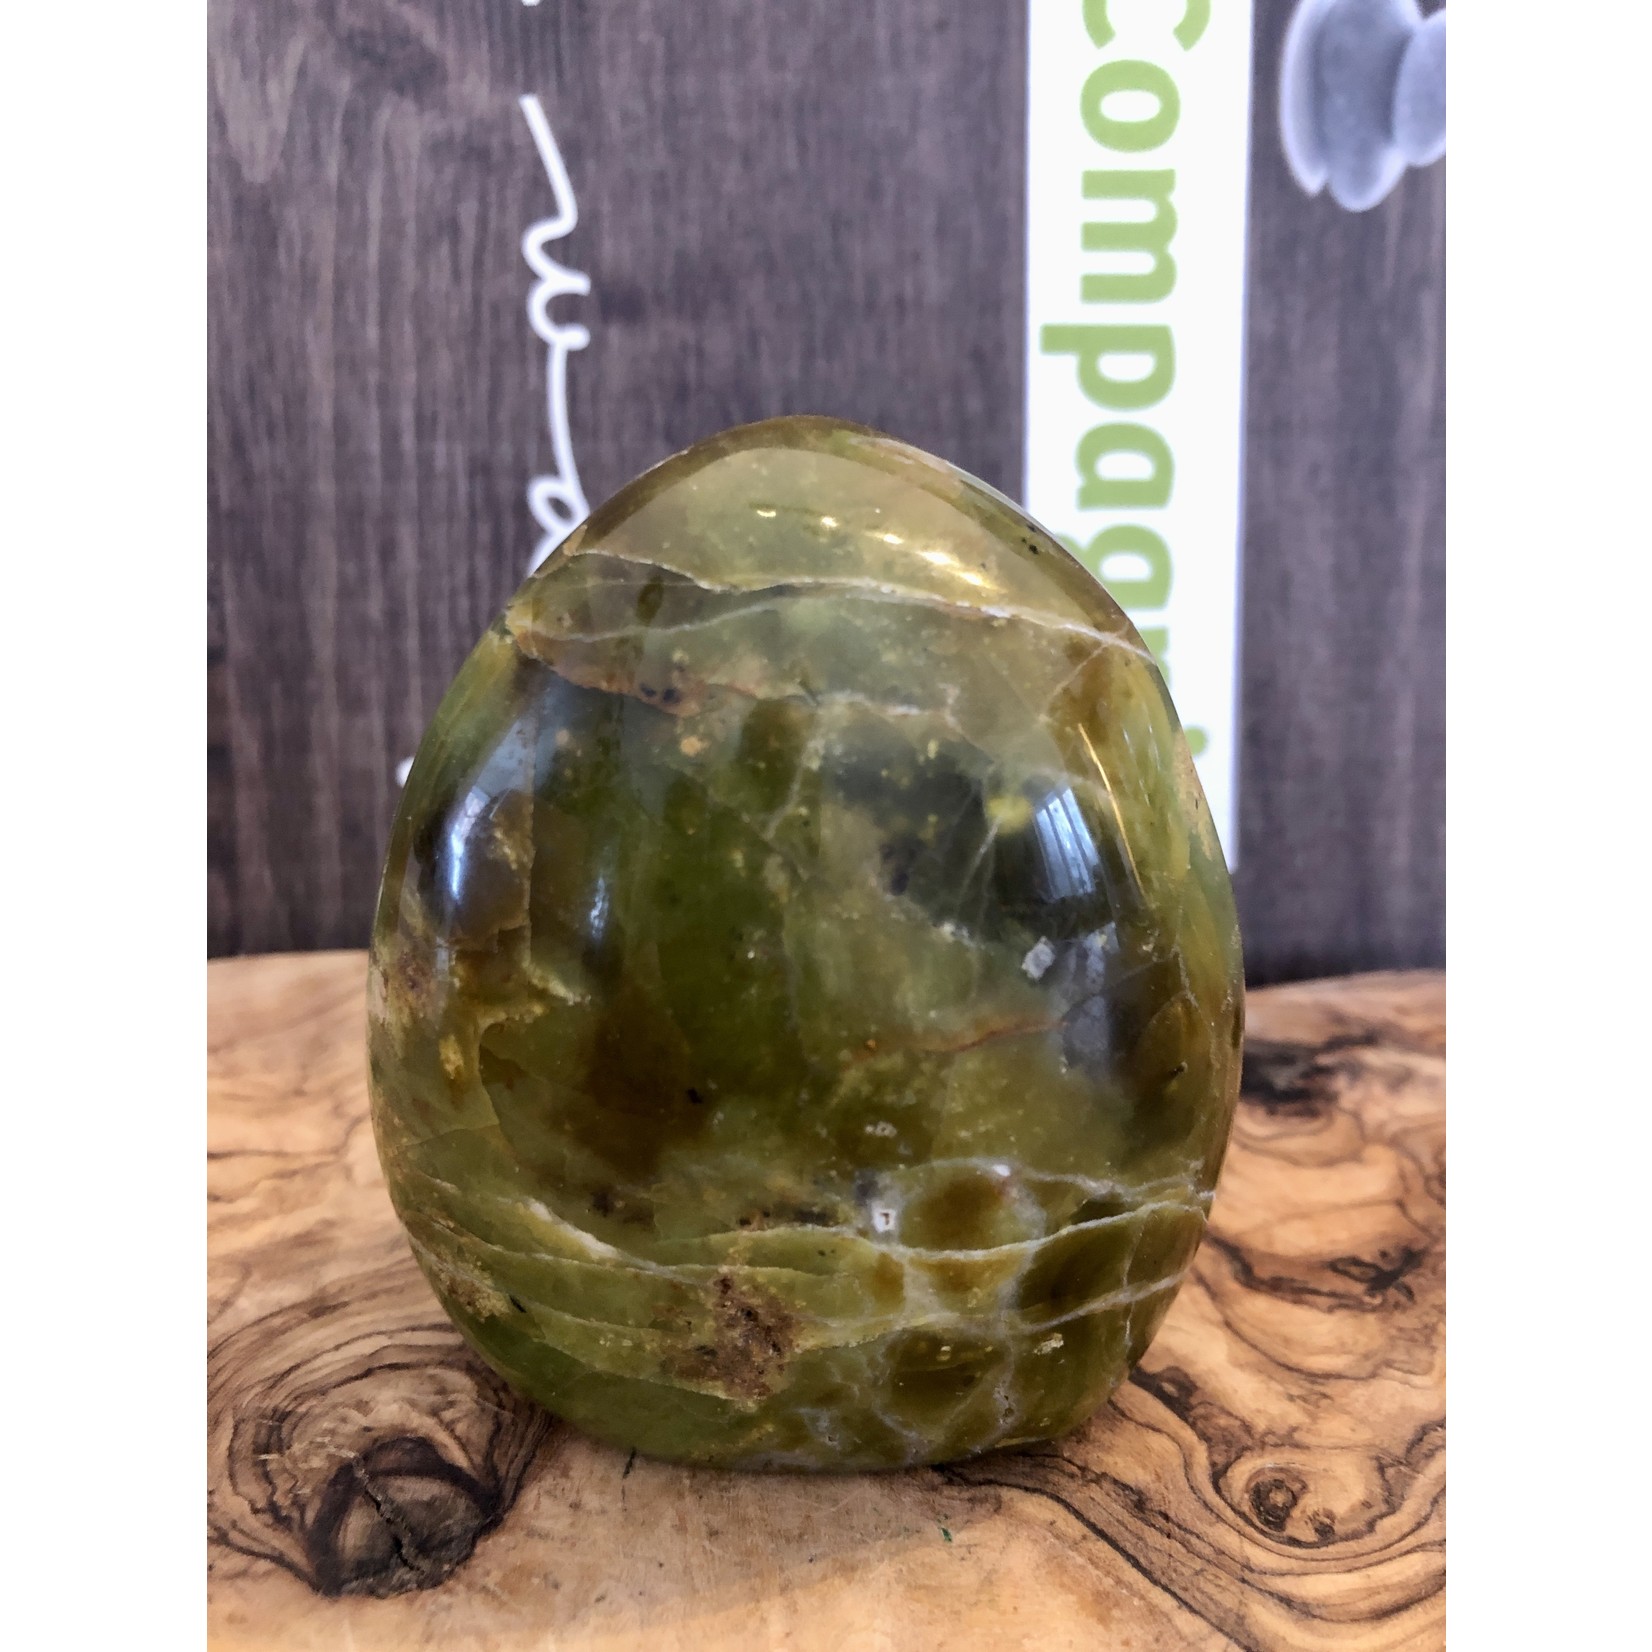 large calming polished green opal, is a stone for healing the heart, especially after bereavement or trauma